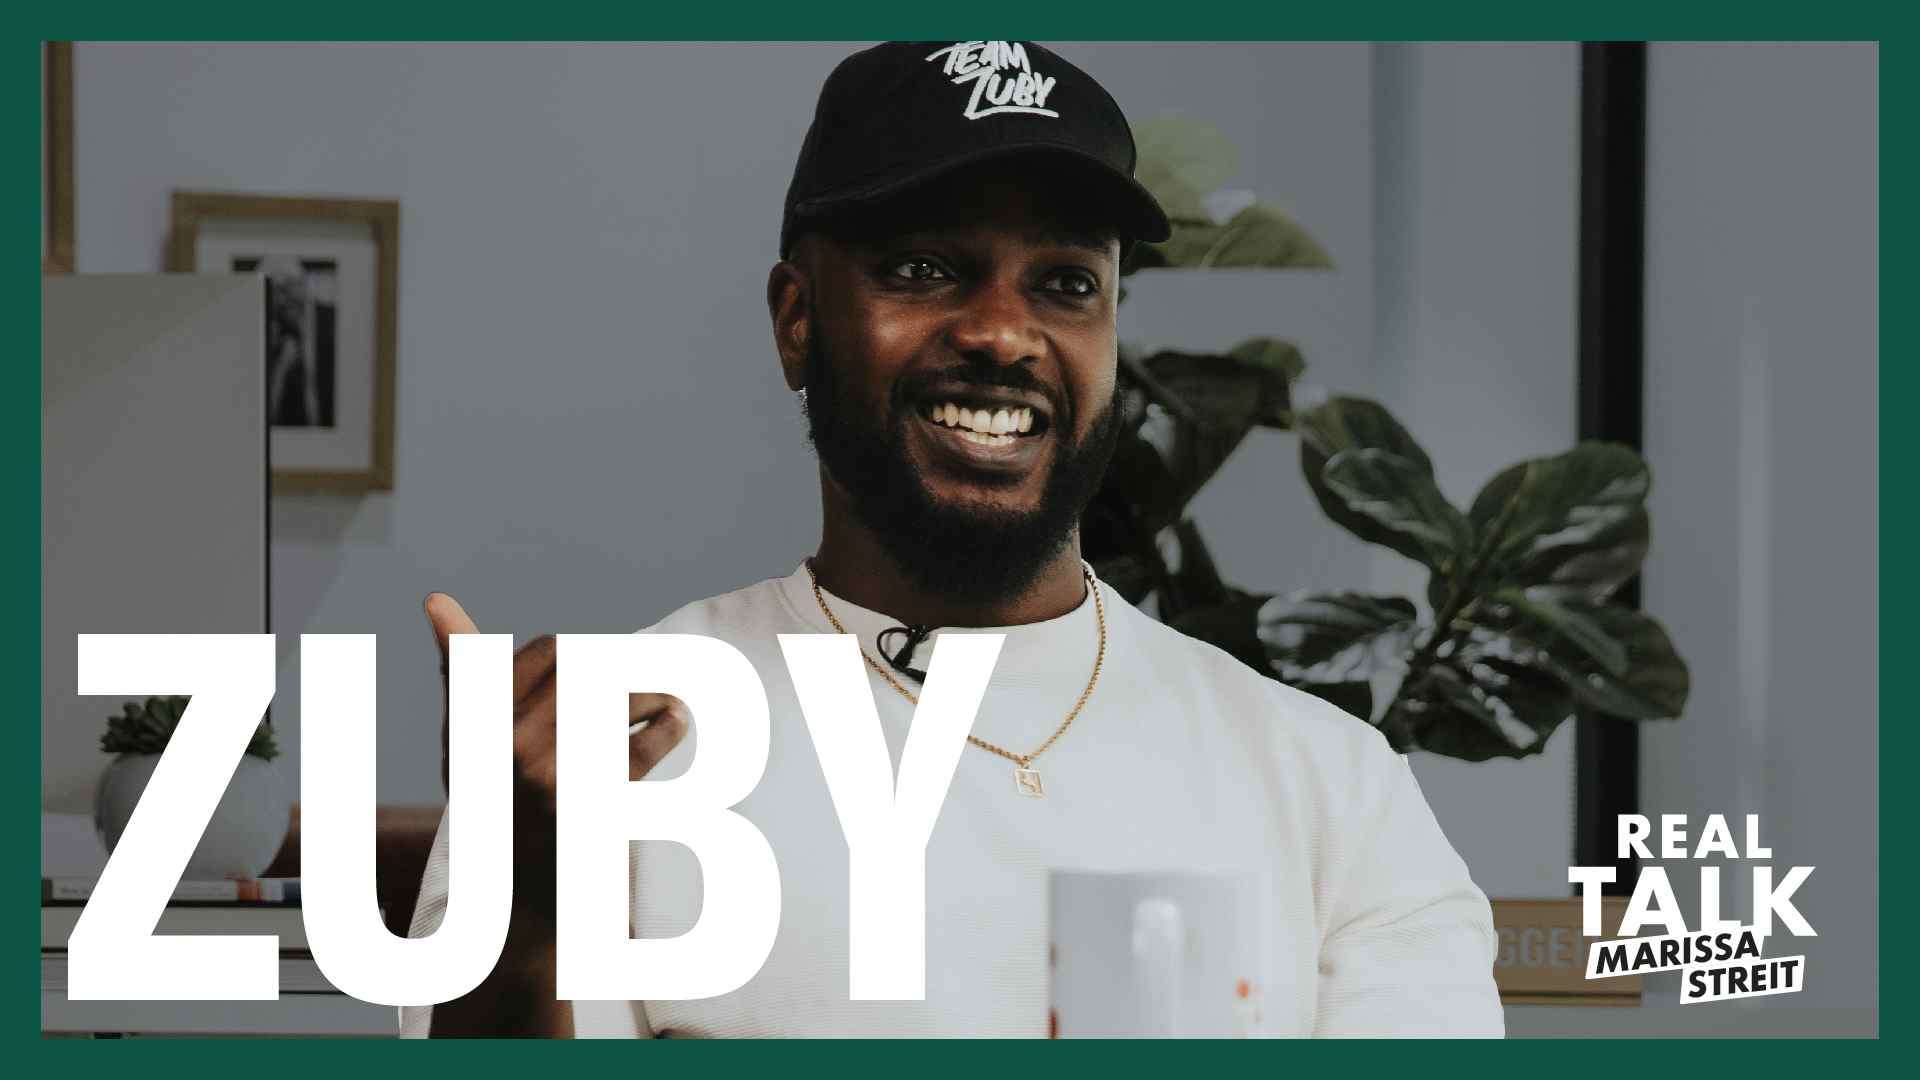 Zuby Shares His Thoughts on Rap Music, Independent Labels, and Why Men Are Getting Squishy